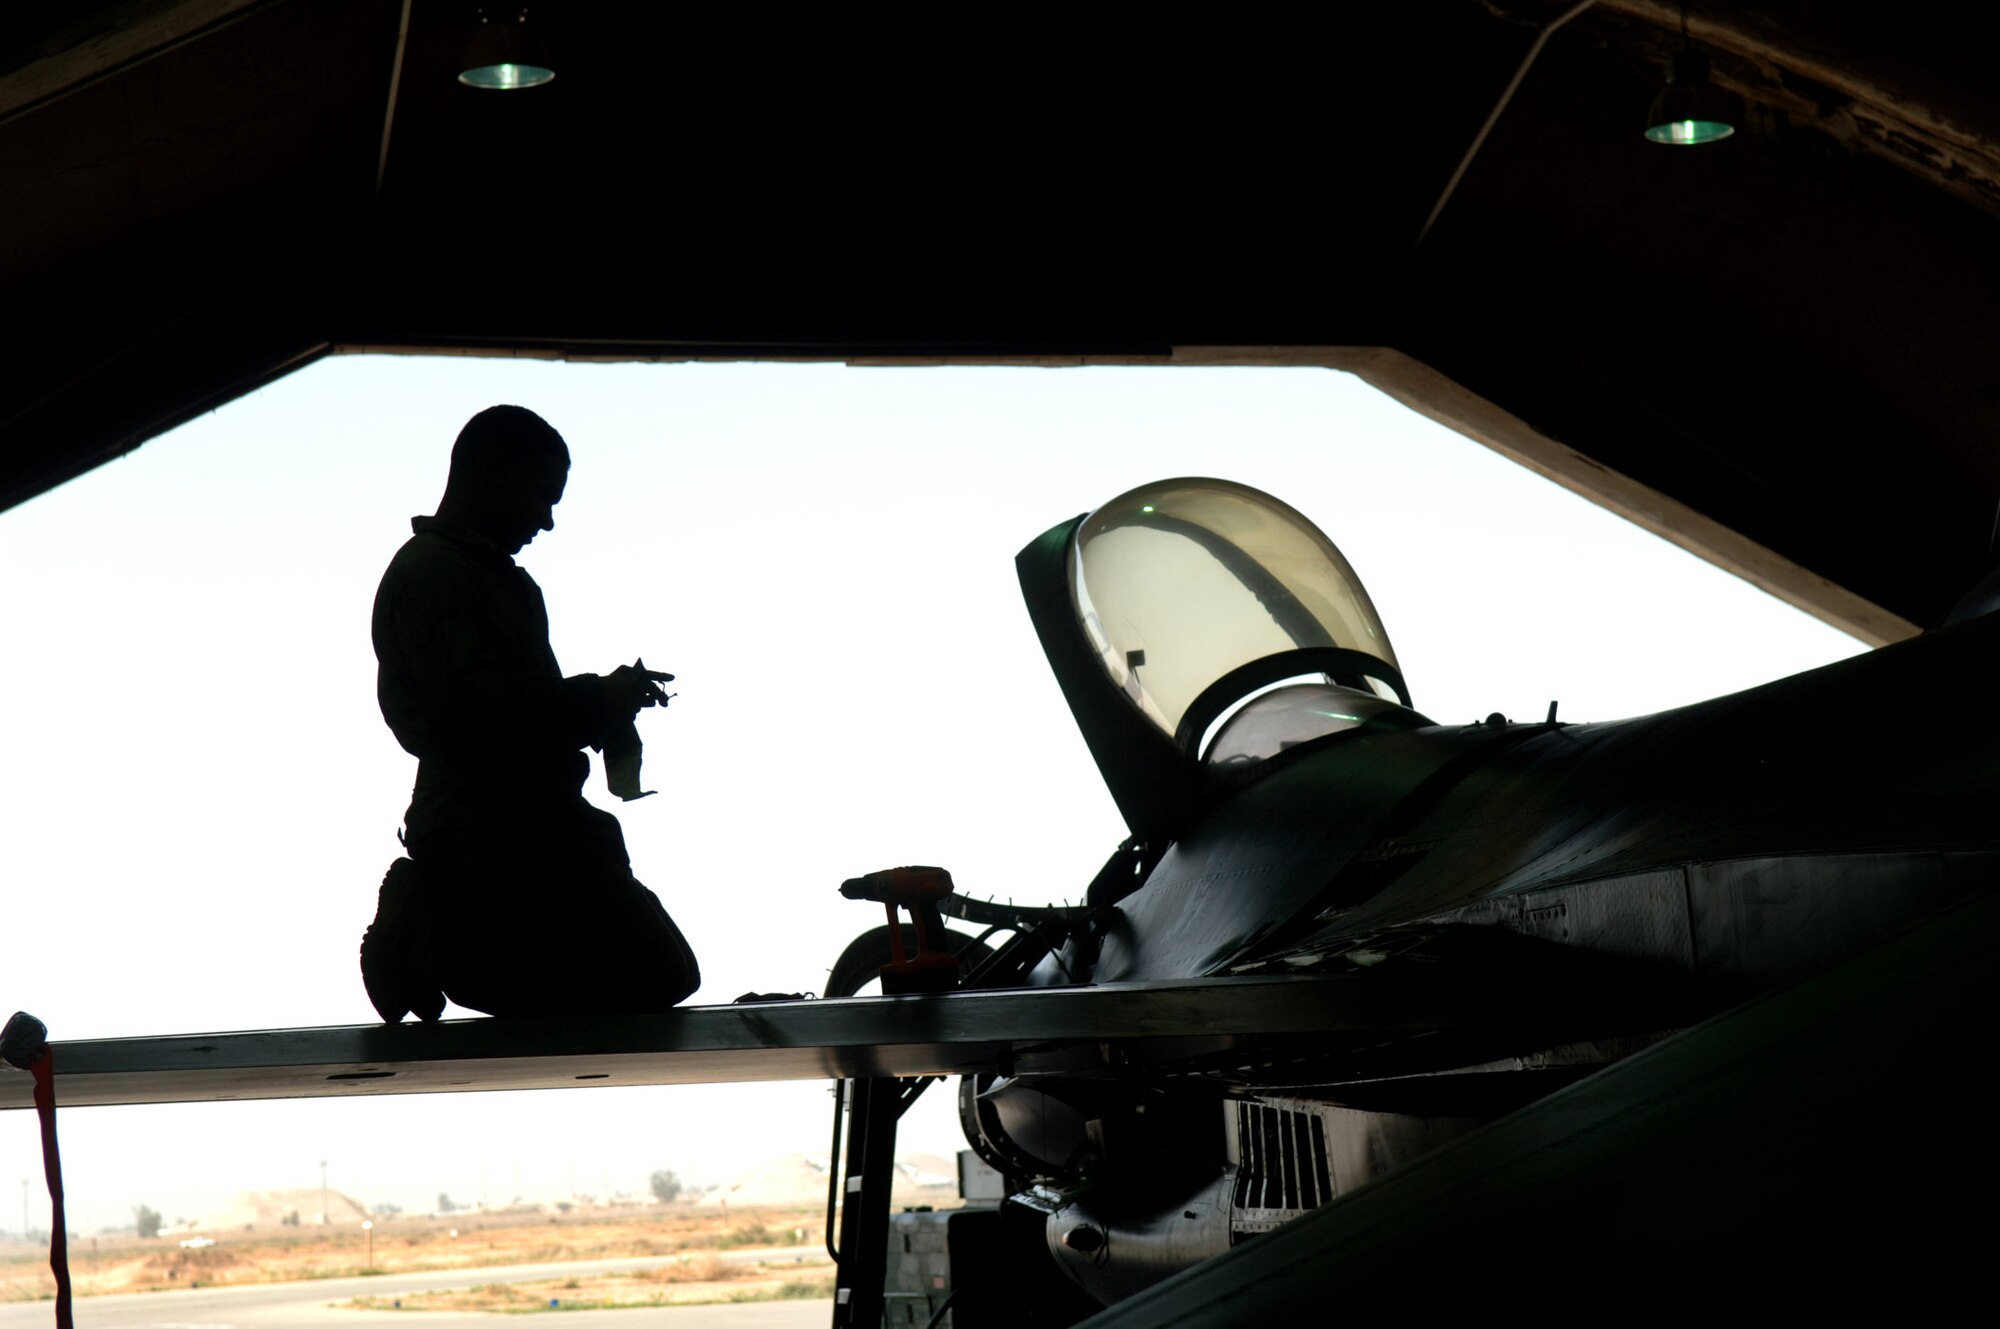 Senior Airman Gil Alicea removes panels from the left wing of an F-16 Fighting Falcon during a phase dock inspection April 16 at Balad Air Base, Iraq. Maintainers inspect all internal parts of the F-16 every 400 flying hours to keep the aircraft mission-ready. Airman Alicea is an F-16 crew chief with the 332nd Expeditionary Maintenance Squadron. (U.S. Air Force photo/Airman 1st Class Nathan Doza) 
